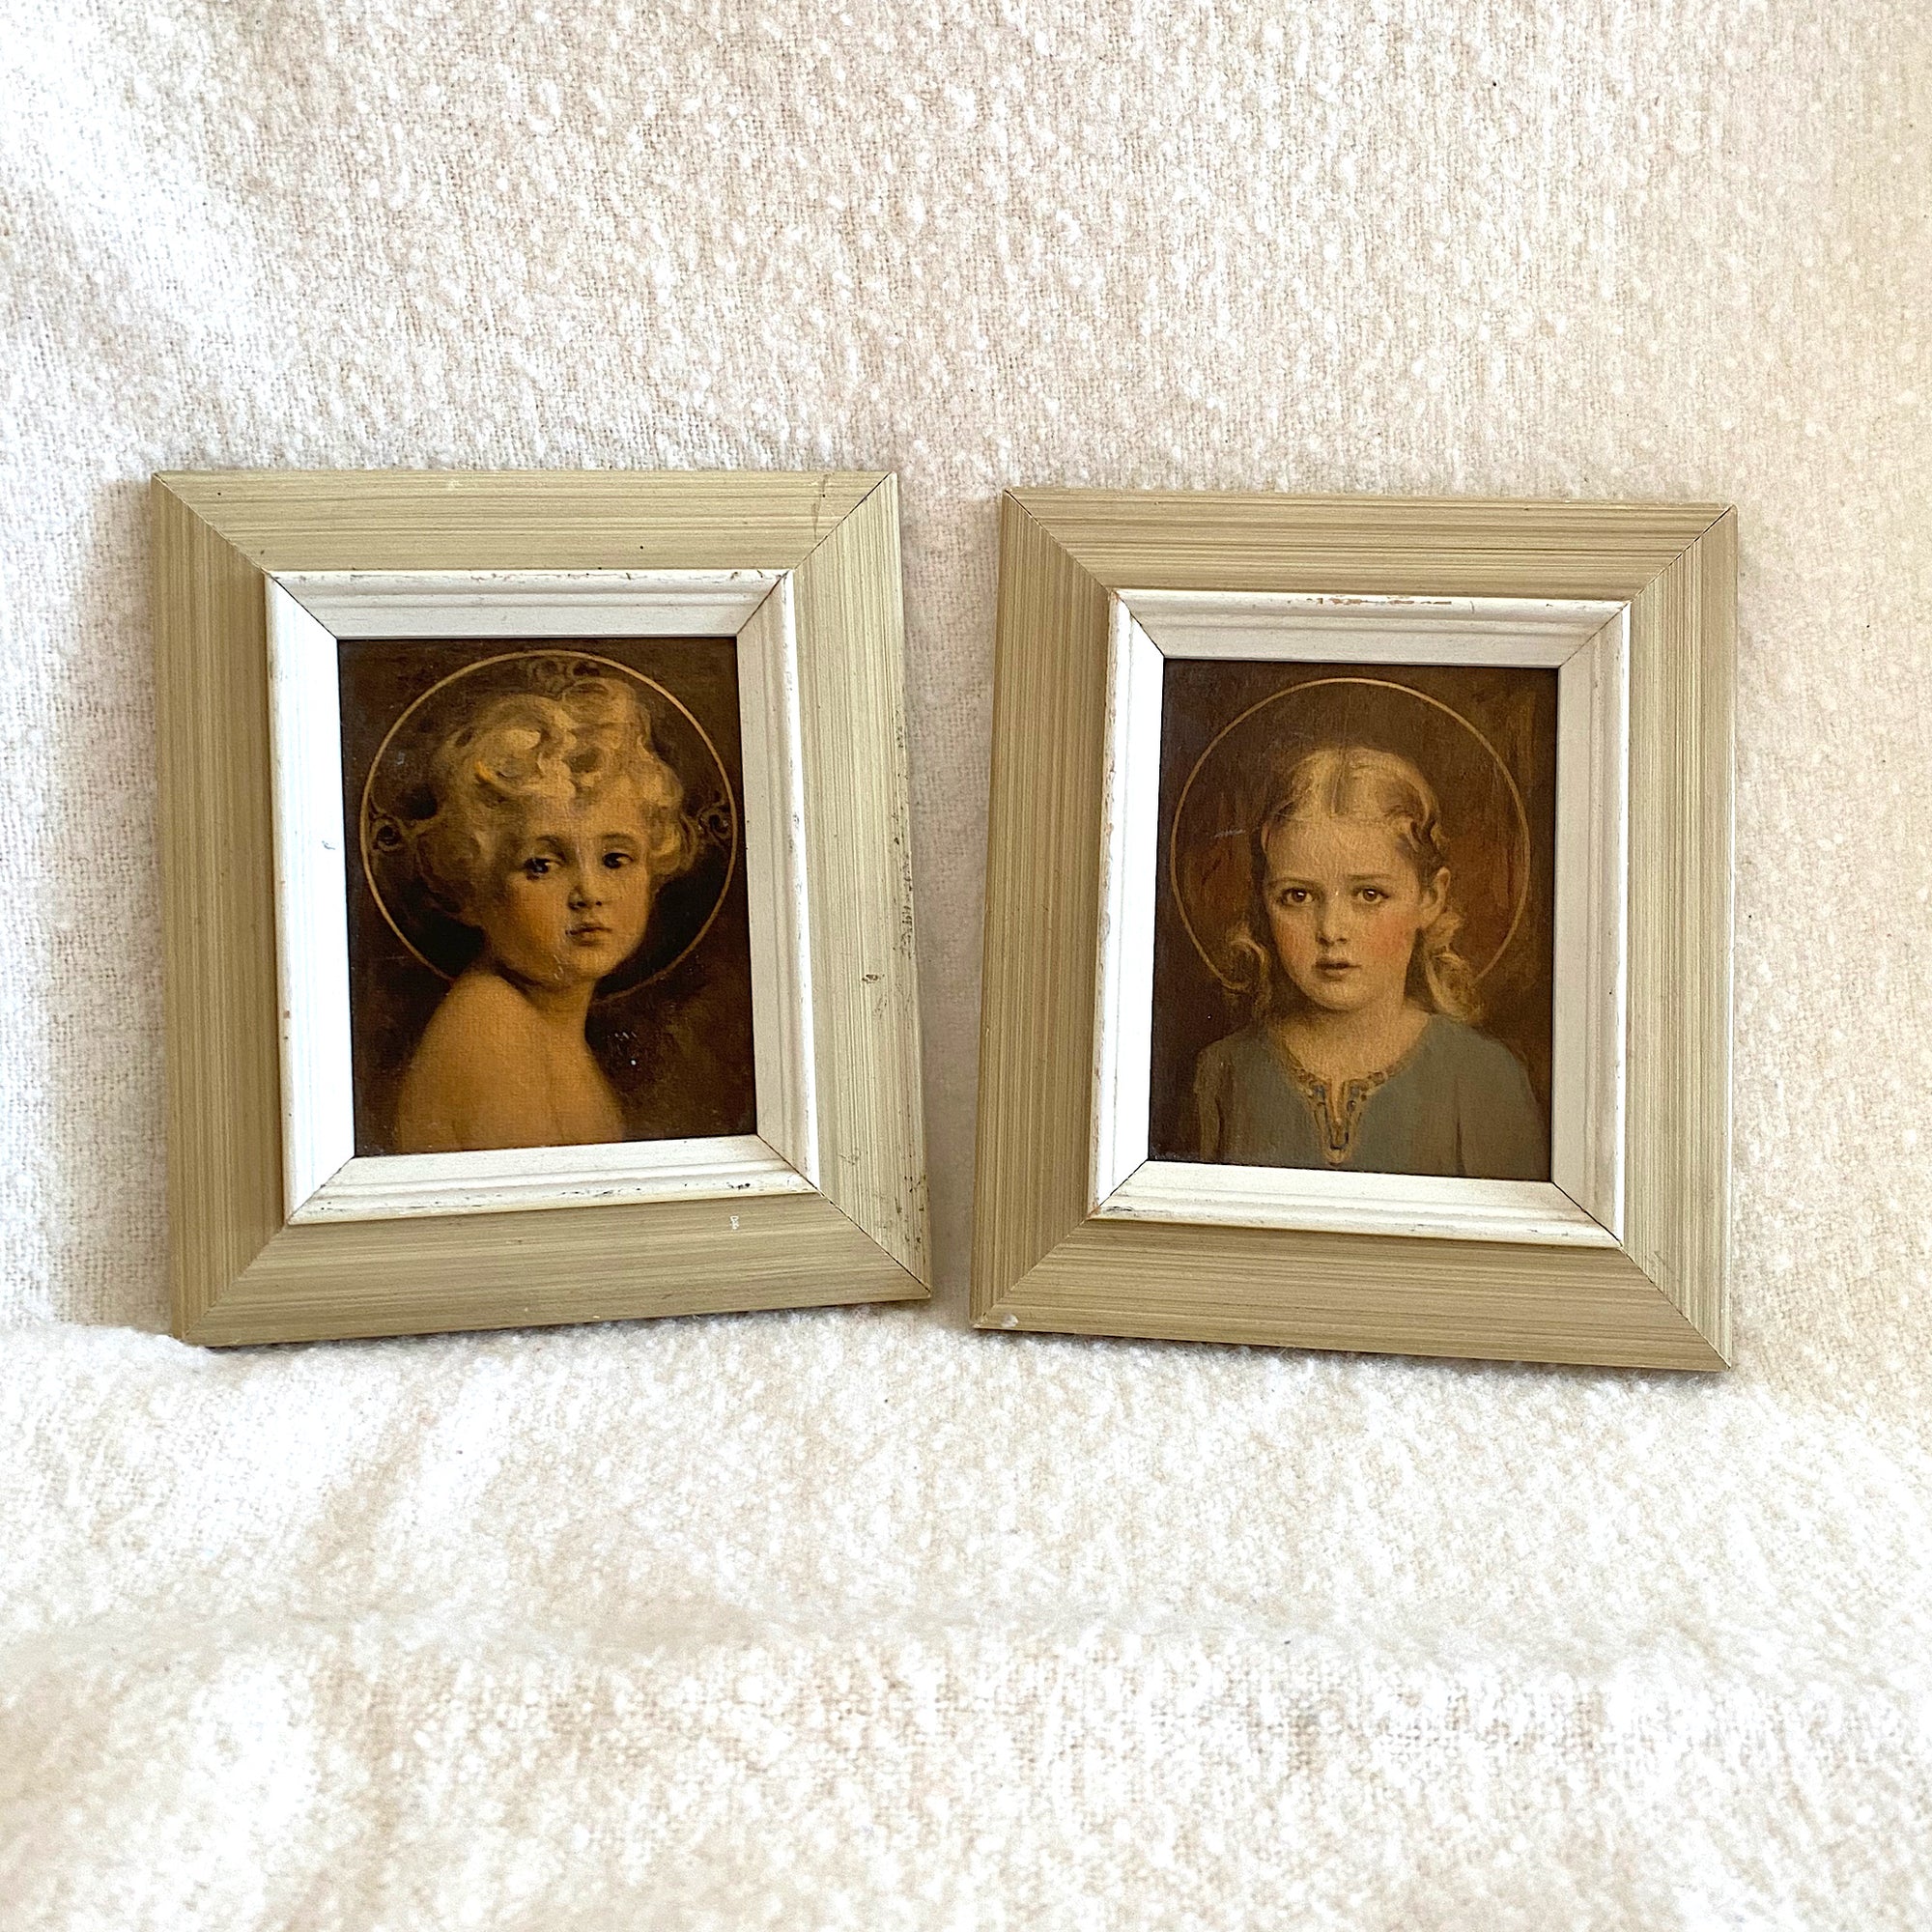 Thrifted Goods - Vintage Pair of Framed Art Prints by C. Bosseron Chambers